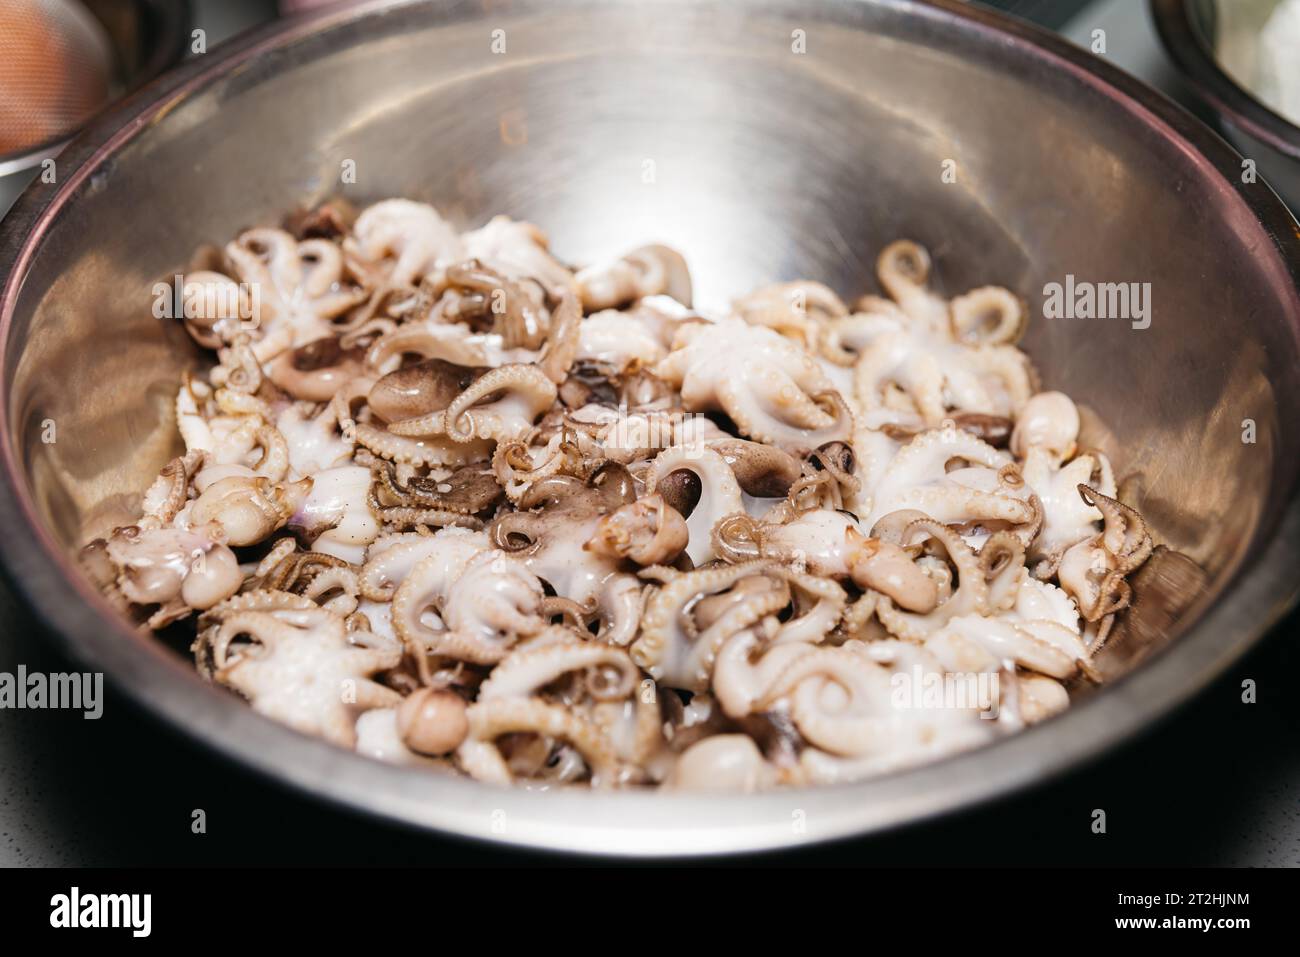 Small raw octopuses in a bowl. Defrosted thawed cephalopods. Close-up. Selective focus. Stock Photo